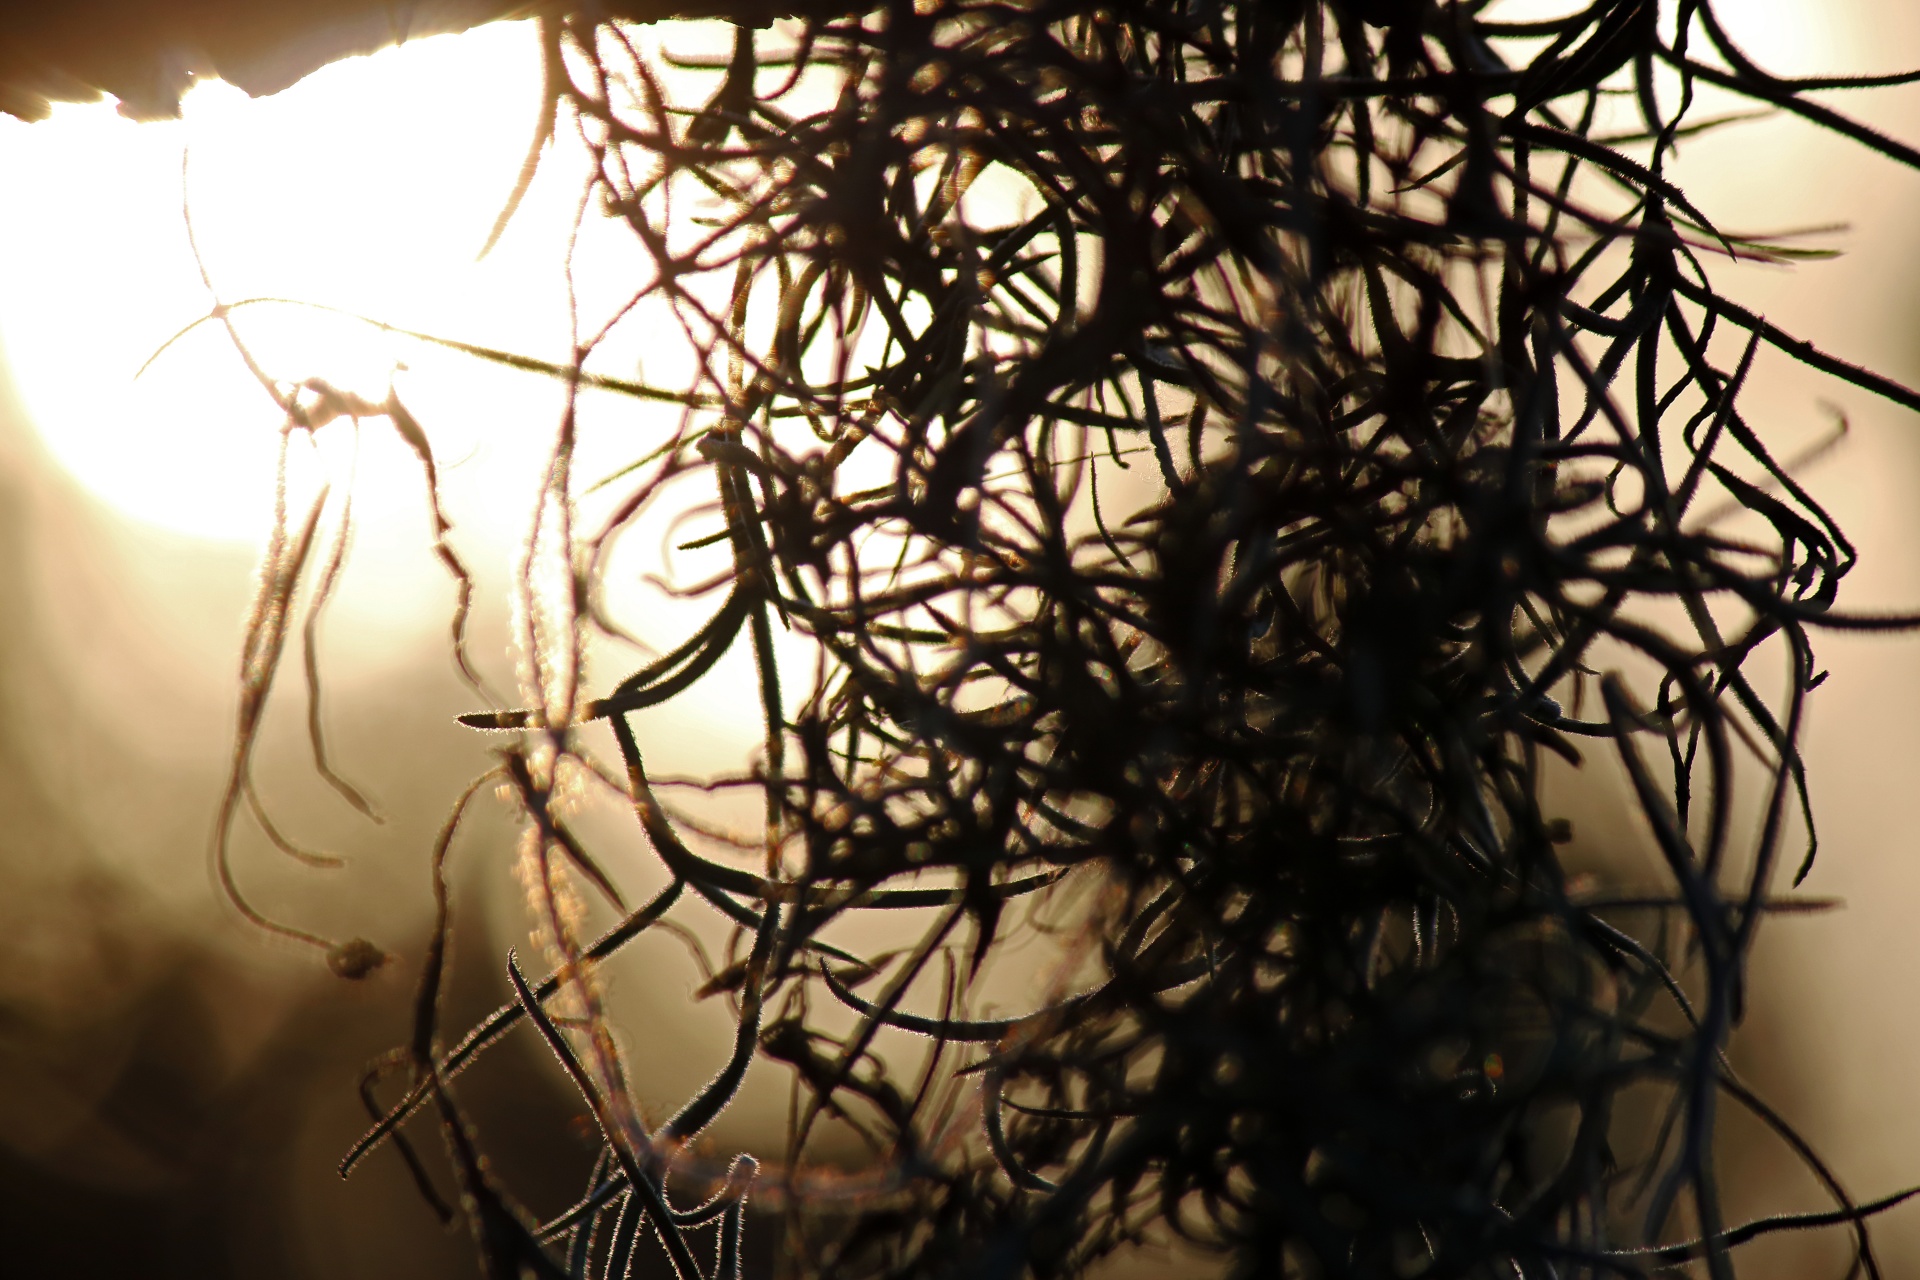 spanish moss in silhouette against sunset